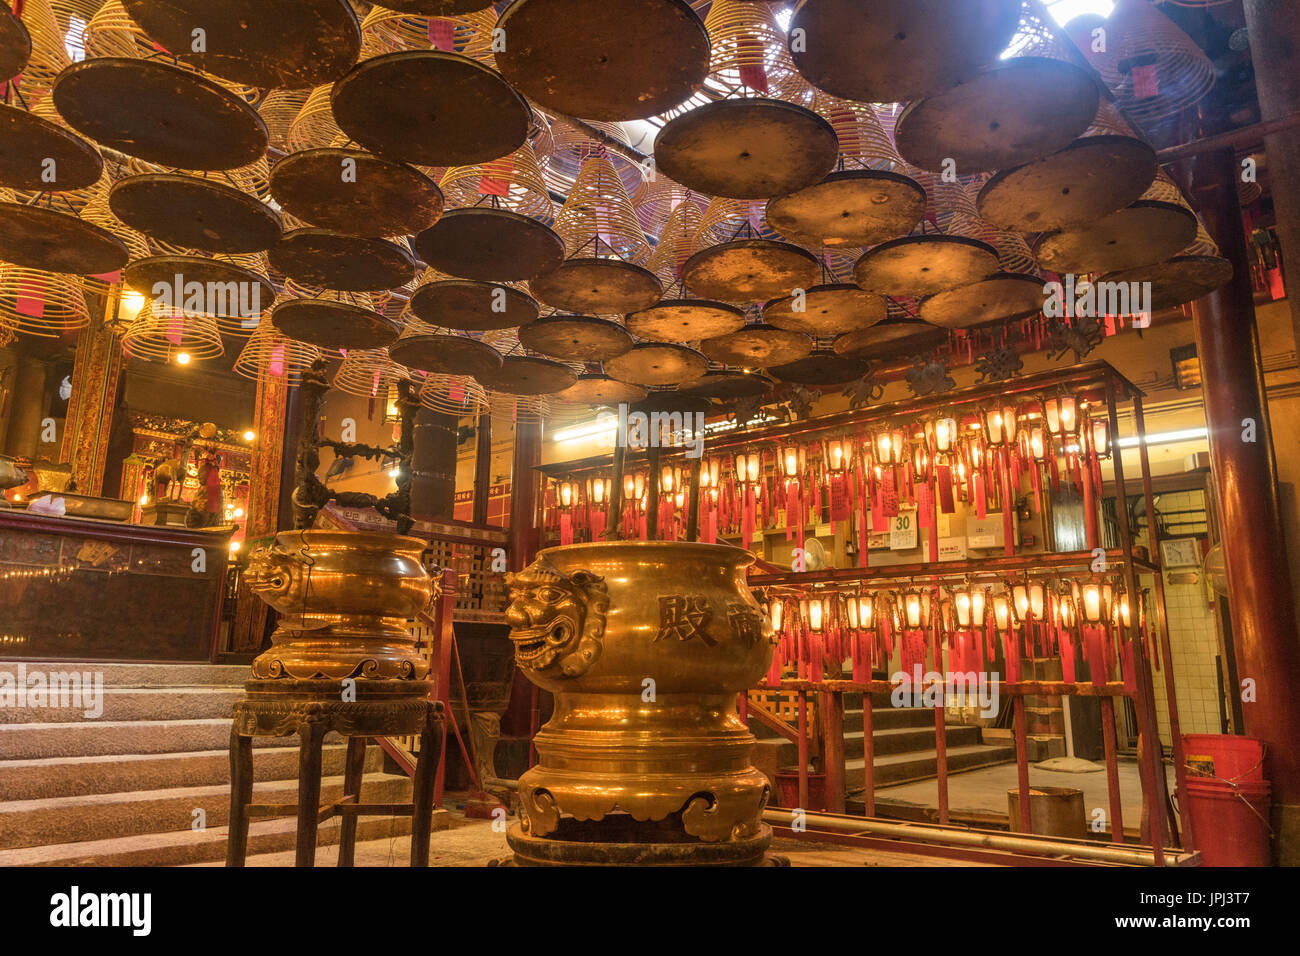 Gold urns and incense coils burning inside Man Mo Temple in Hong Kong Stock Photo